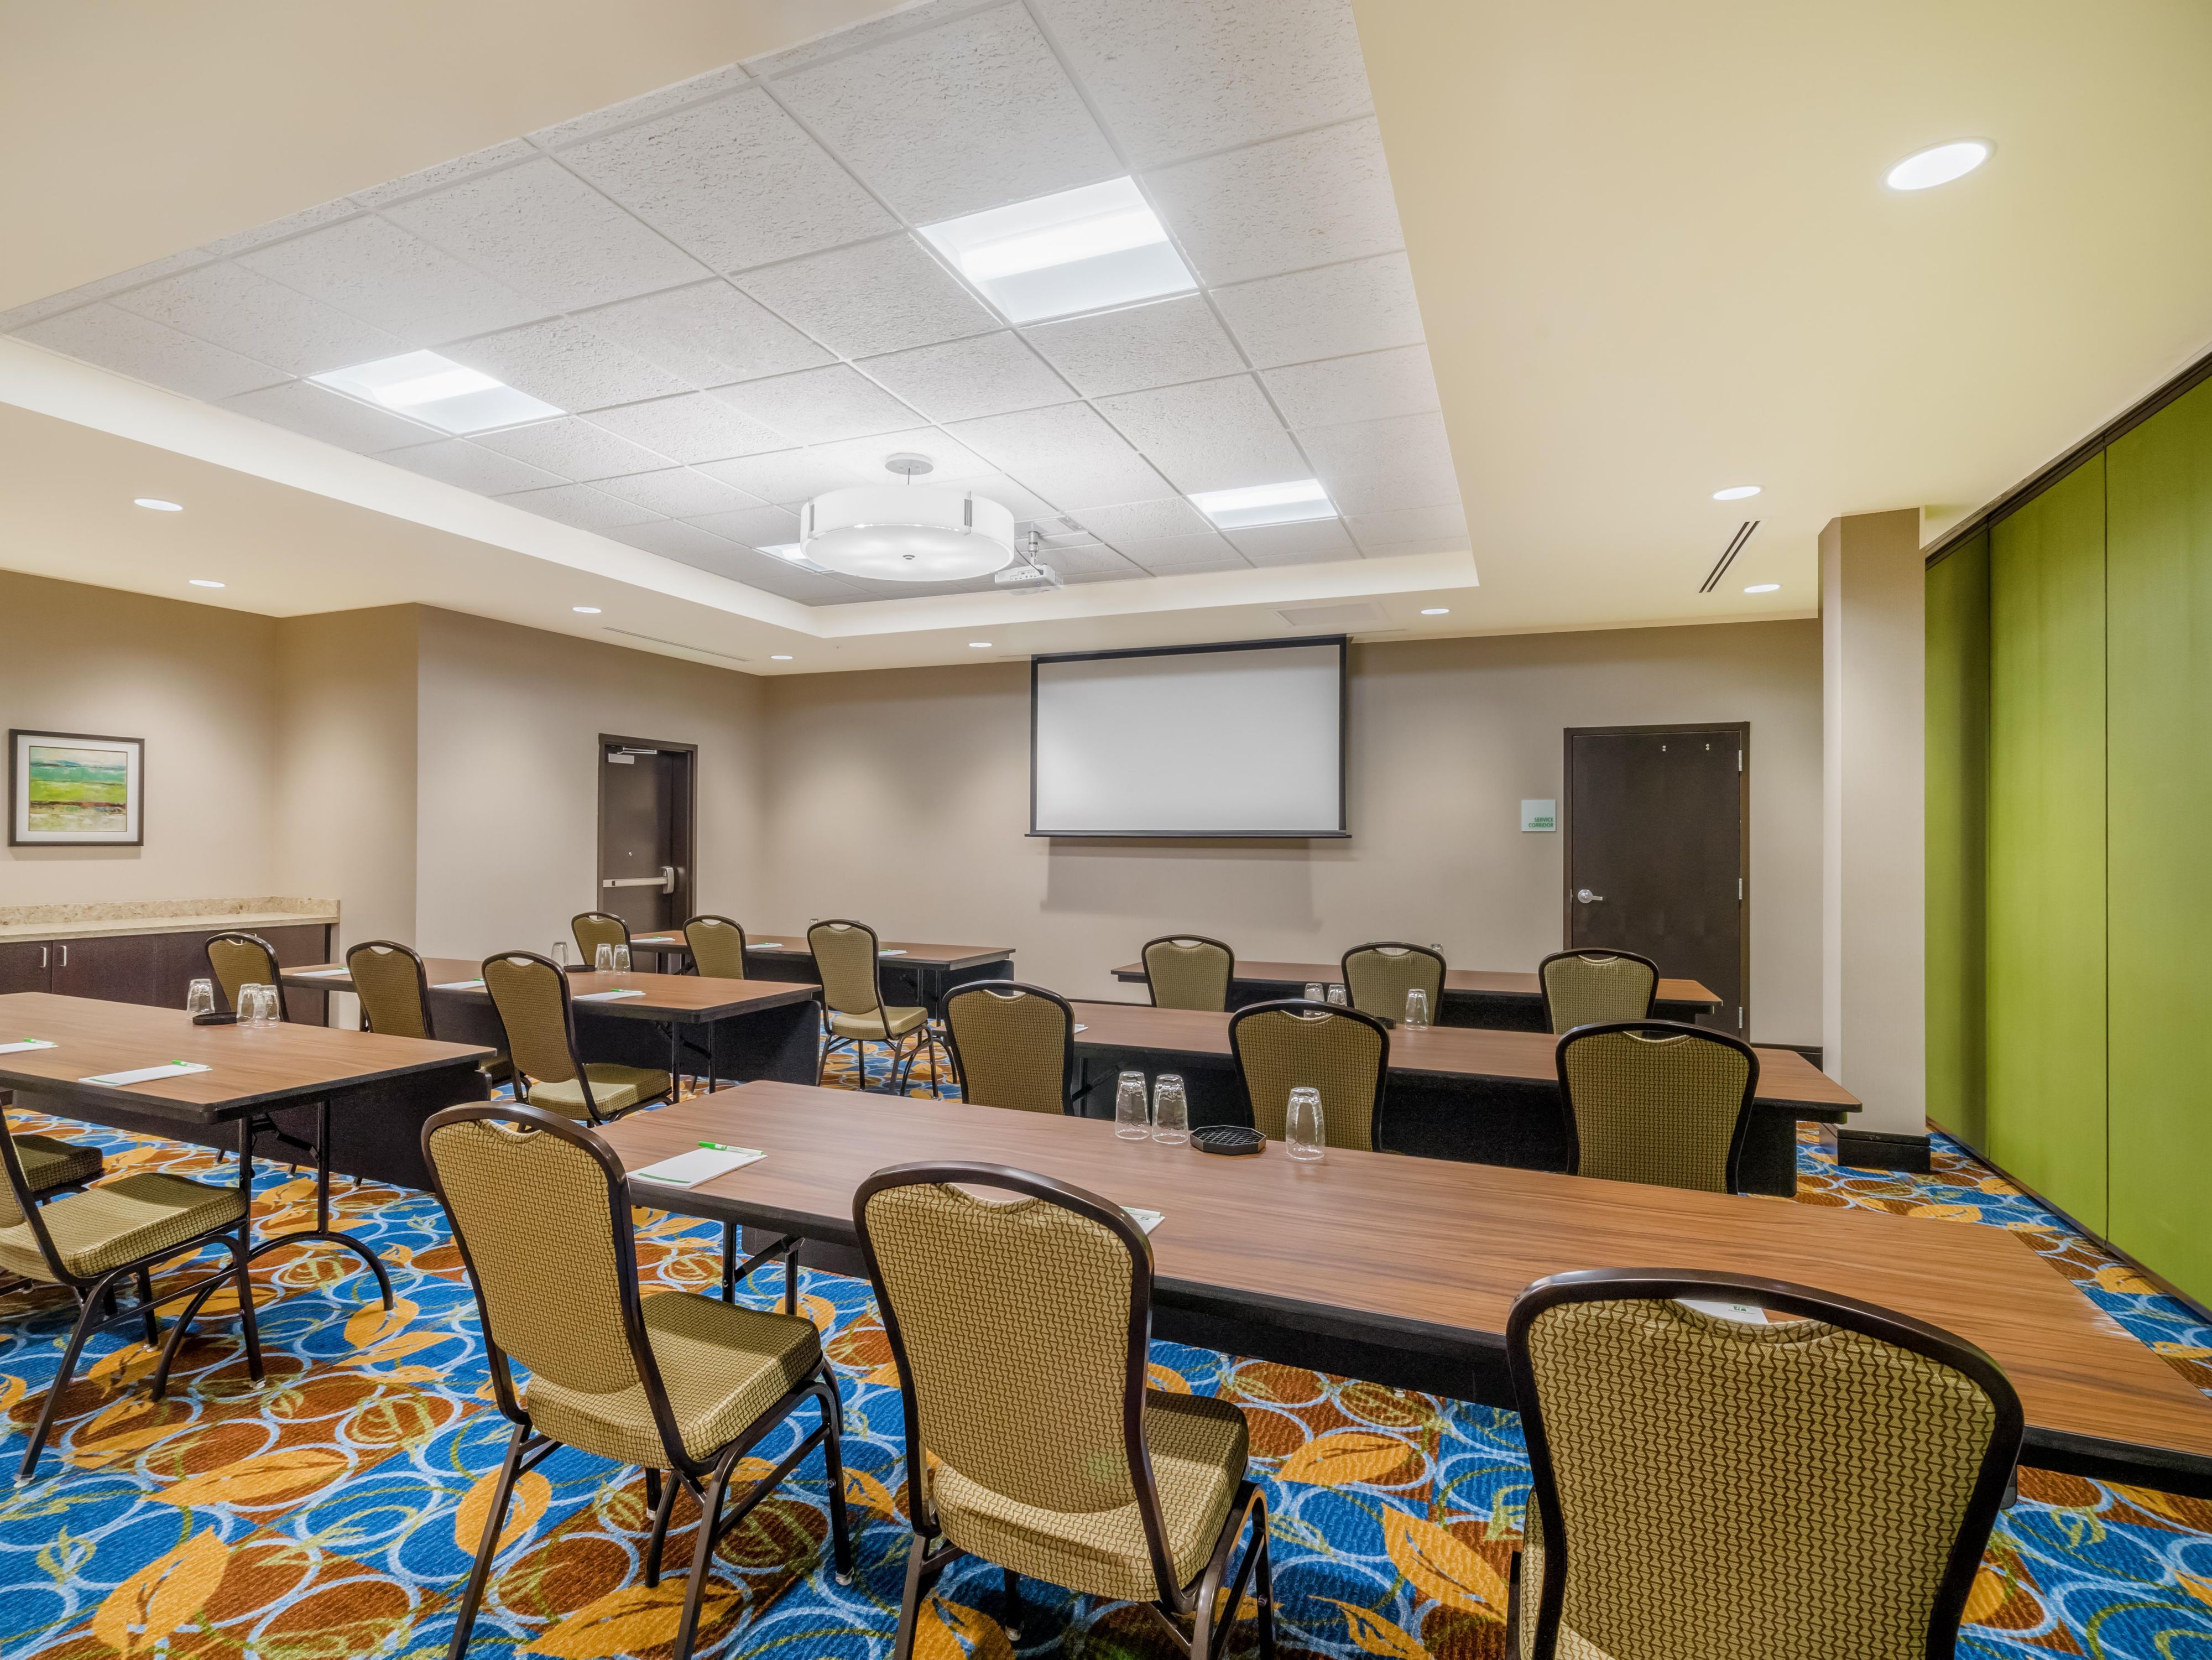 Hickory A or B offer 750 square feet of meeting space and can hold up to 48 people each. The two can be combined into one large meeting space (51'6" x 27'10") that can accommodate up to 104 people. Please contact our sales team to learn more! 